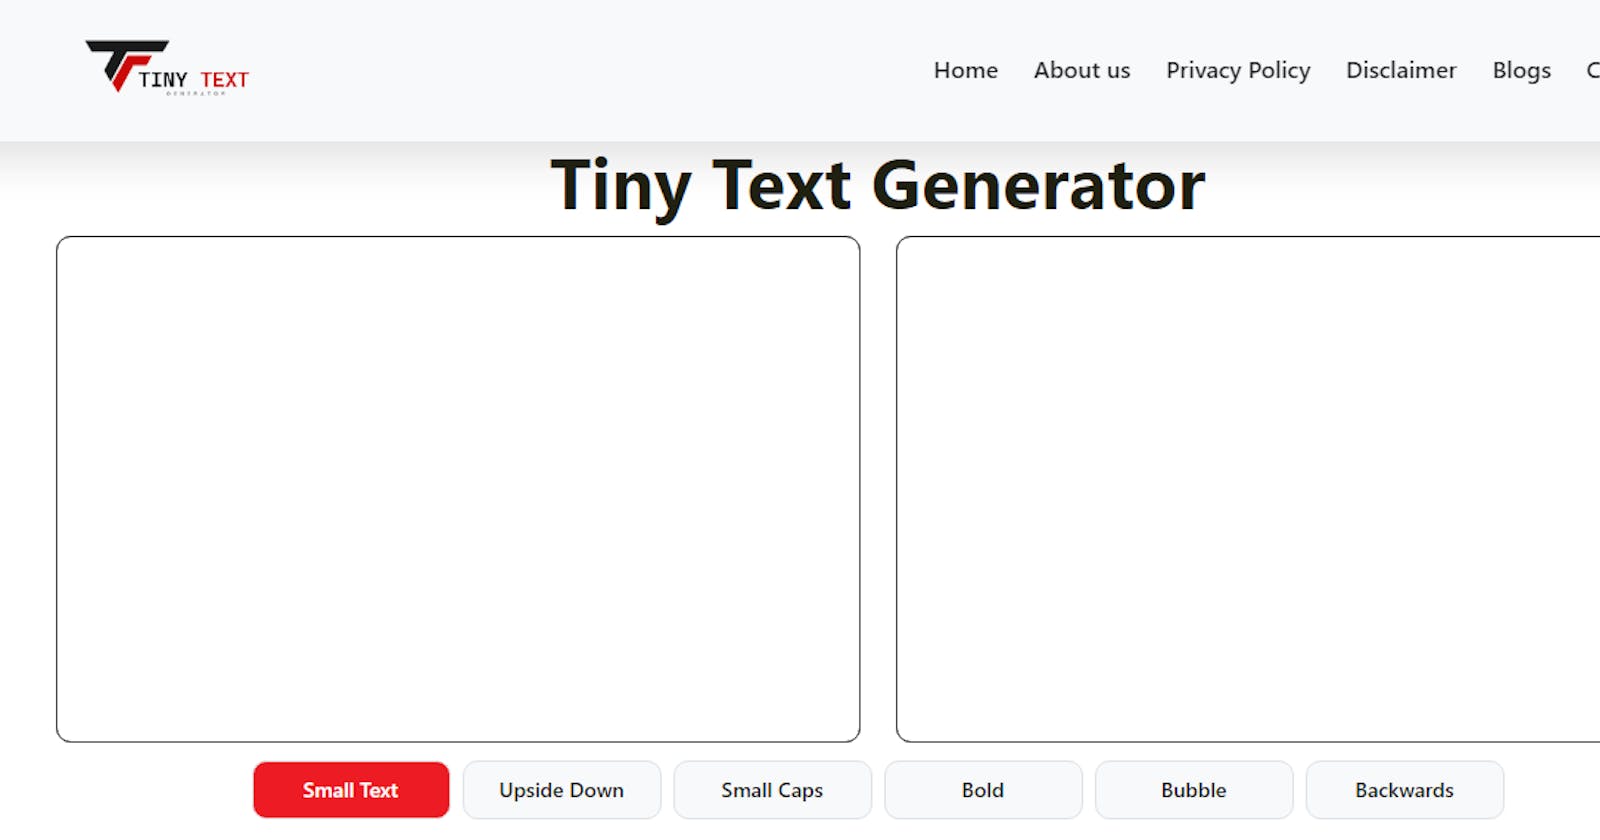 What is Tiny Text Generator